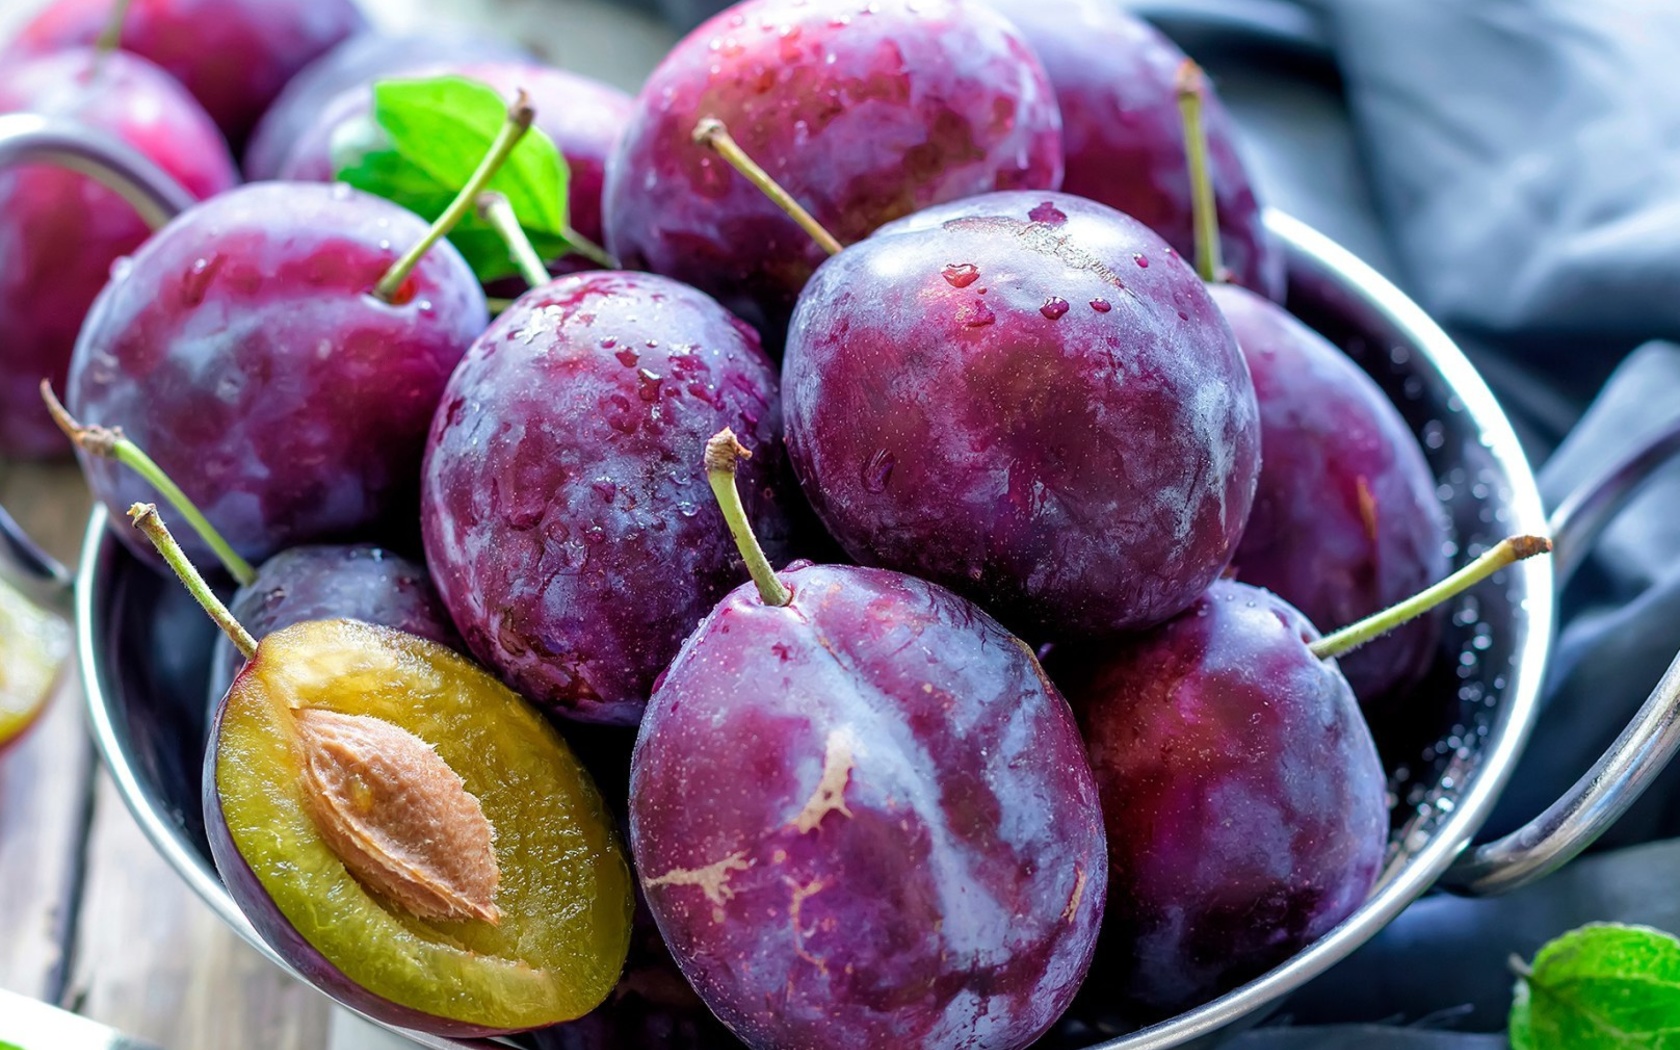 Plums with Vitamins wallpaper 1680x1050